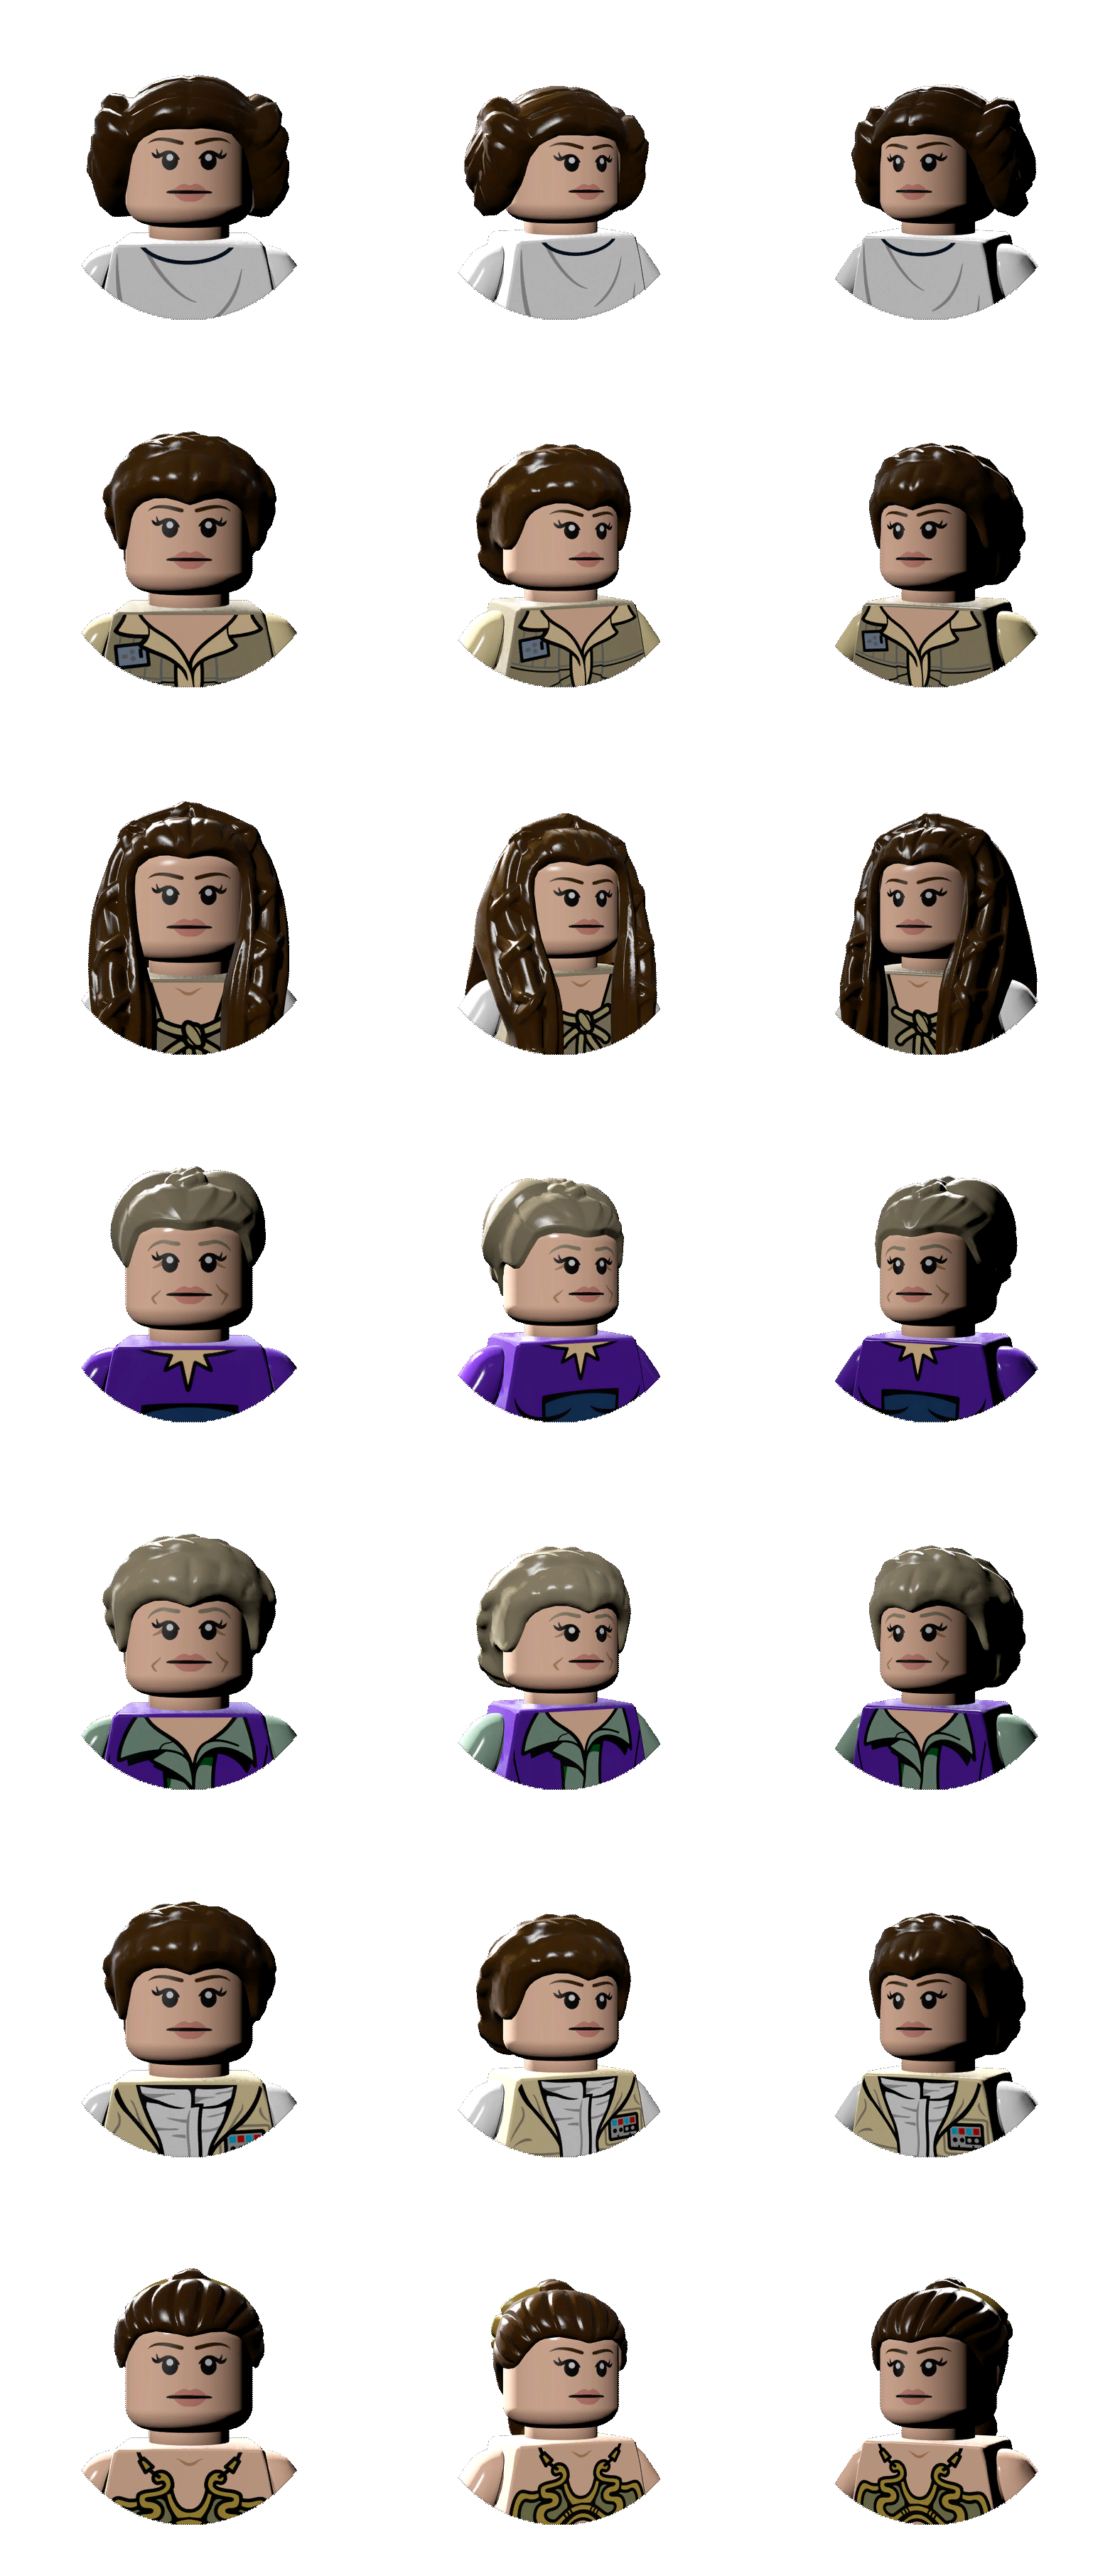 LEGO Star Wars: The Force Awakens - Character Icons (Princess Leia)